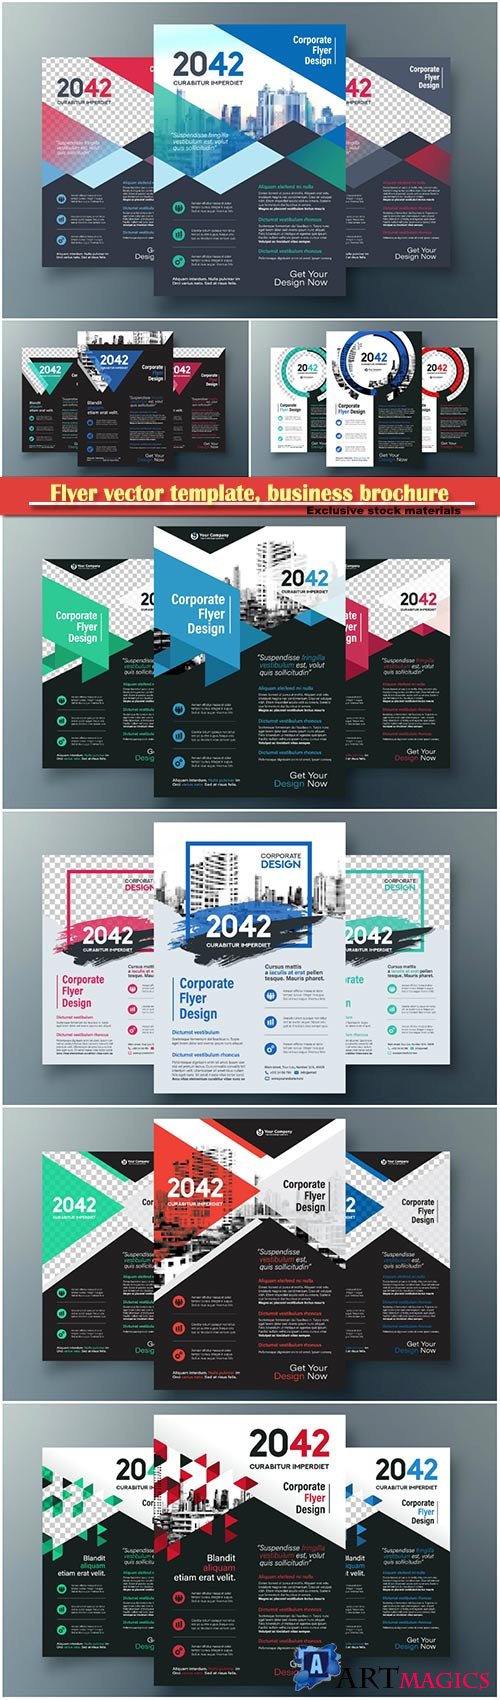 Flyer vector template, business brochure, magazine cover # 41